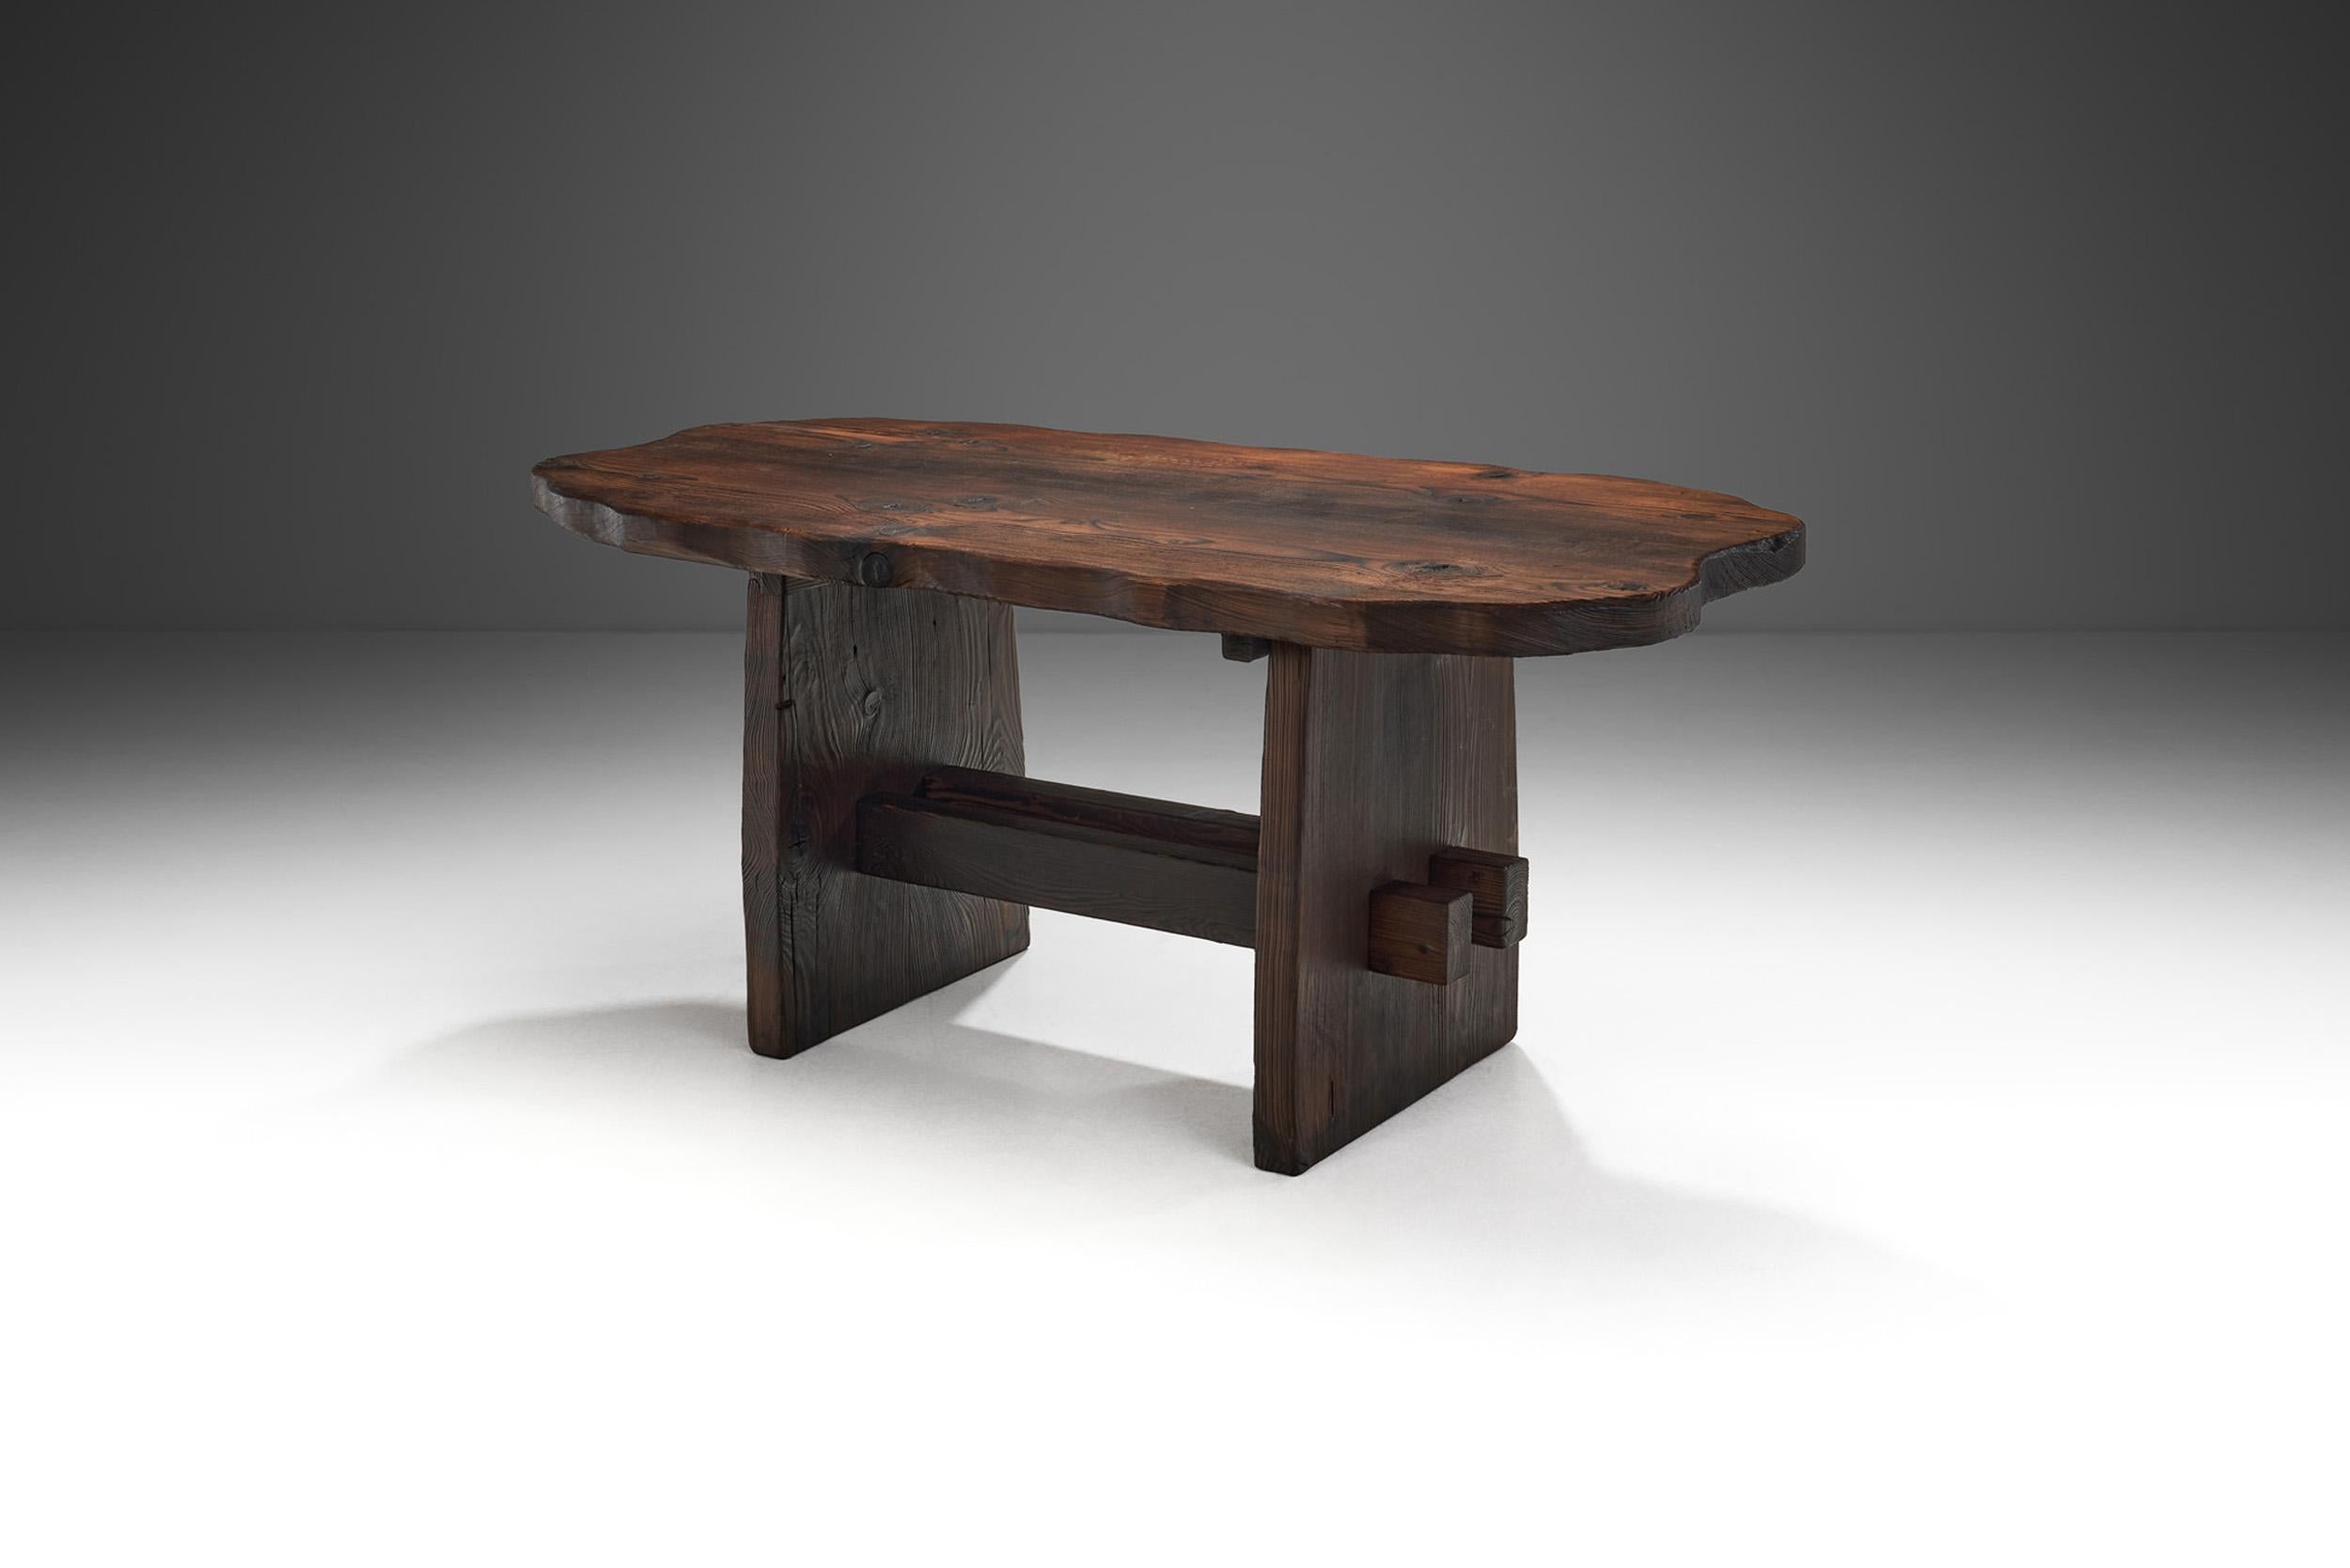 With a robust organic form and an earth-toned palette, this dining table is the embodiment of 20th century brutalist design. It is somber, giving importance to eerie organic and rugged shapes in dark, earthy tones. The imperfections of the wood and